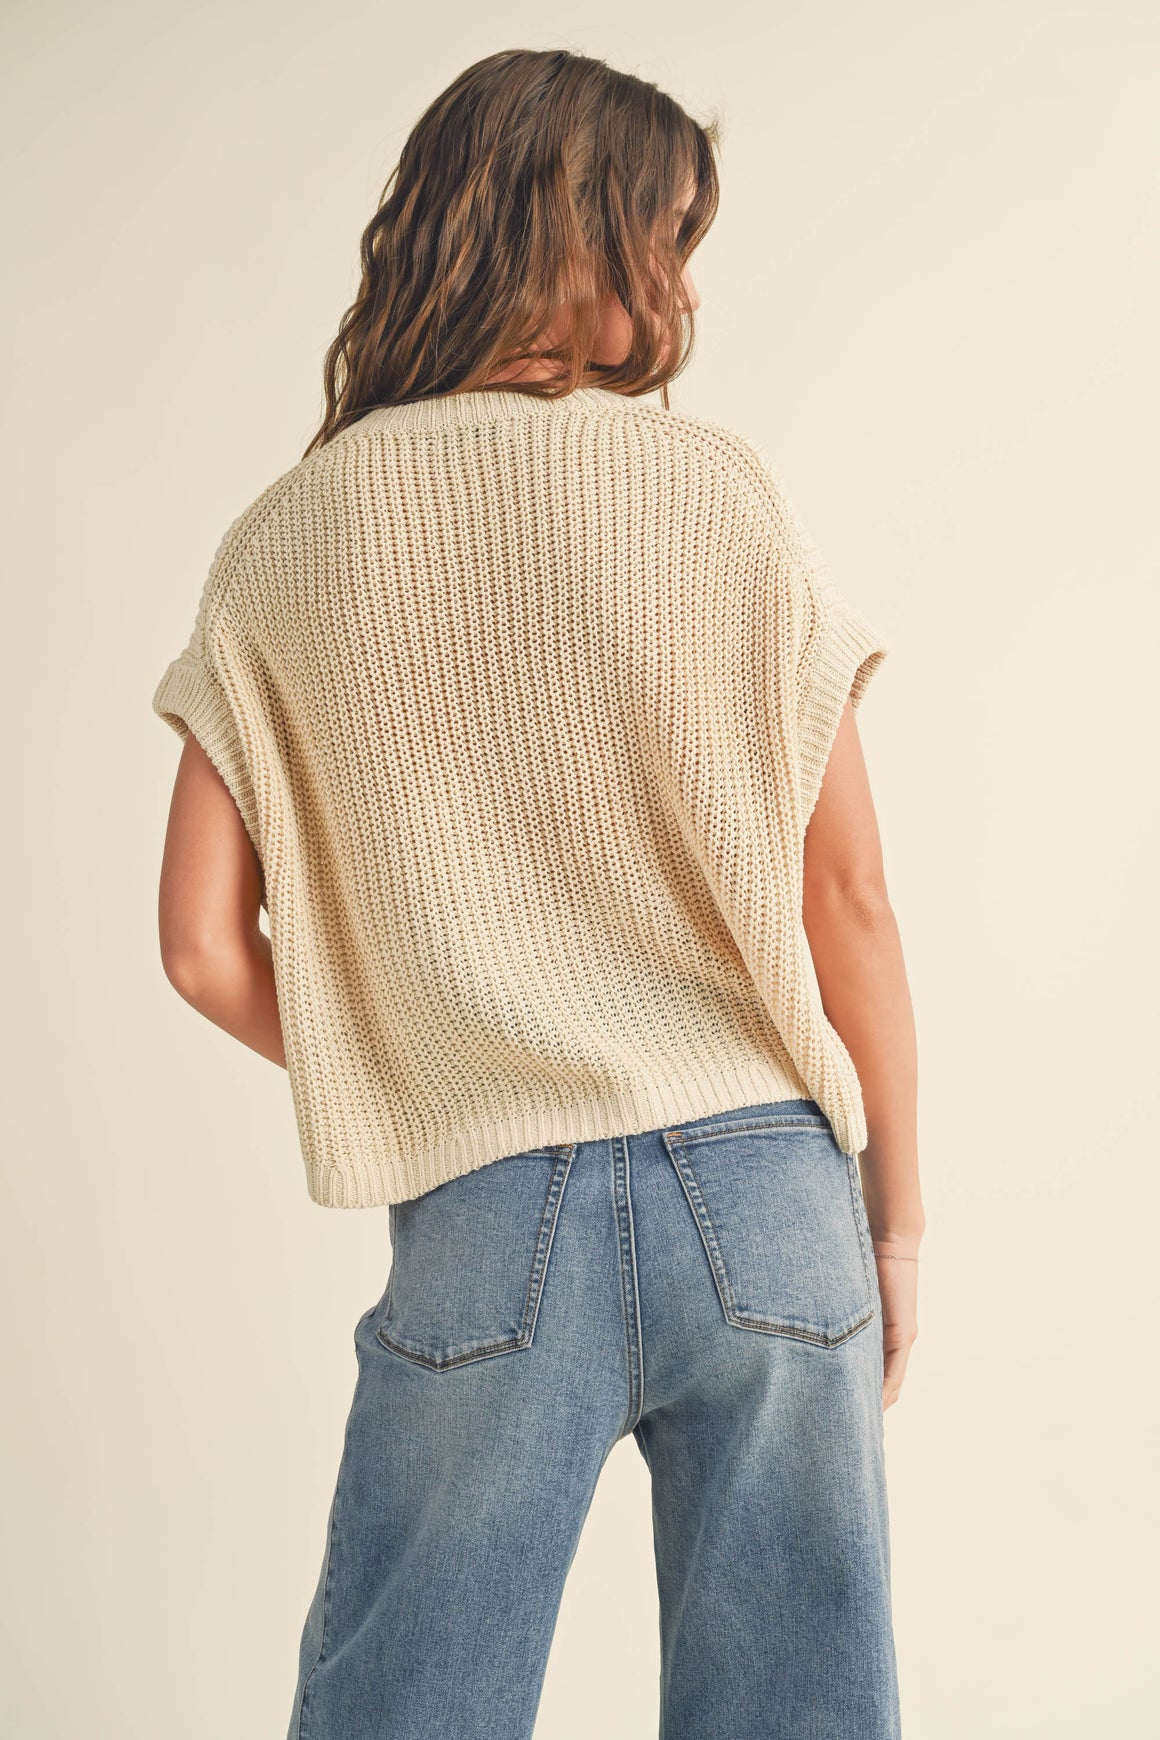 Top | Dolman Sleeve Knitted